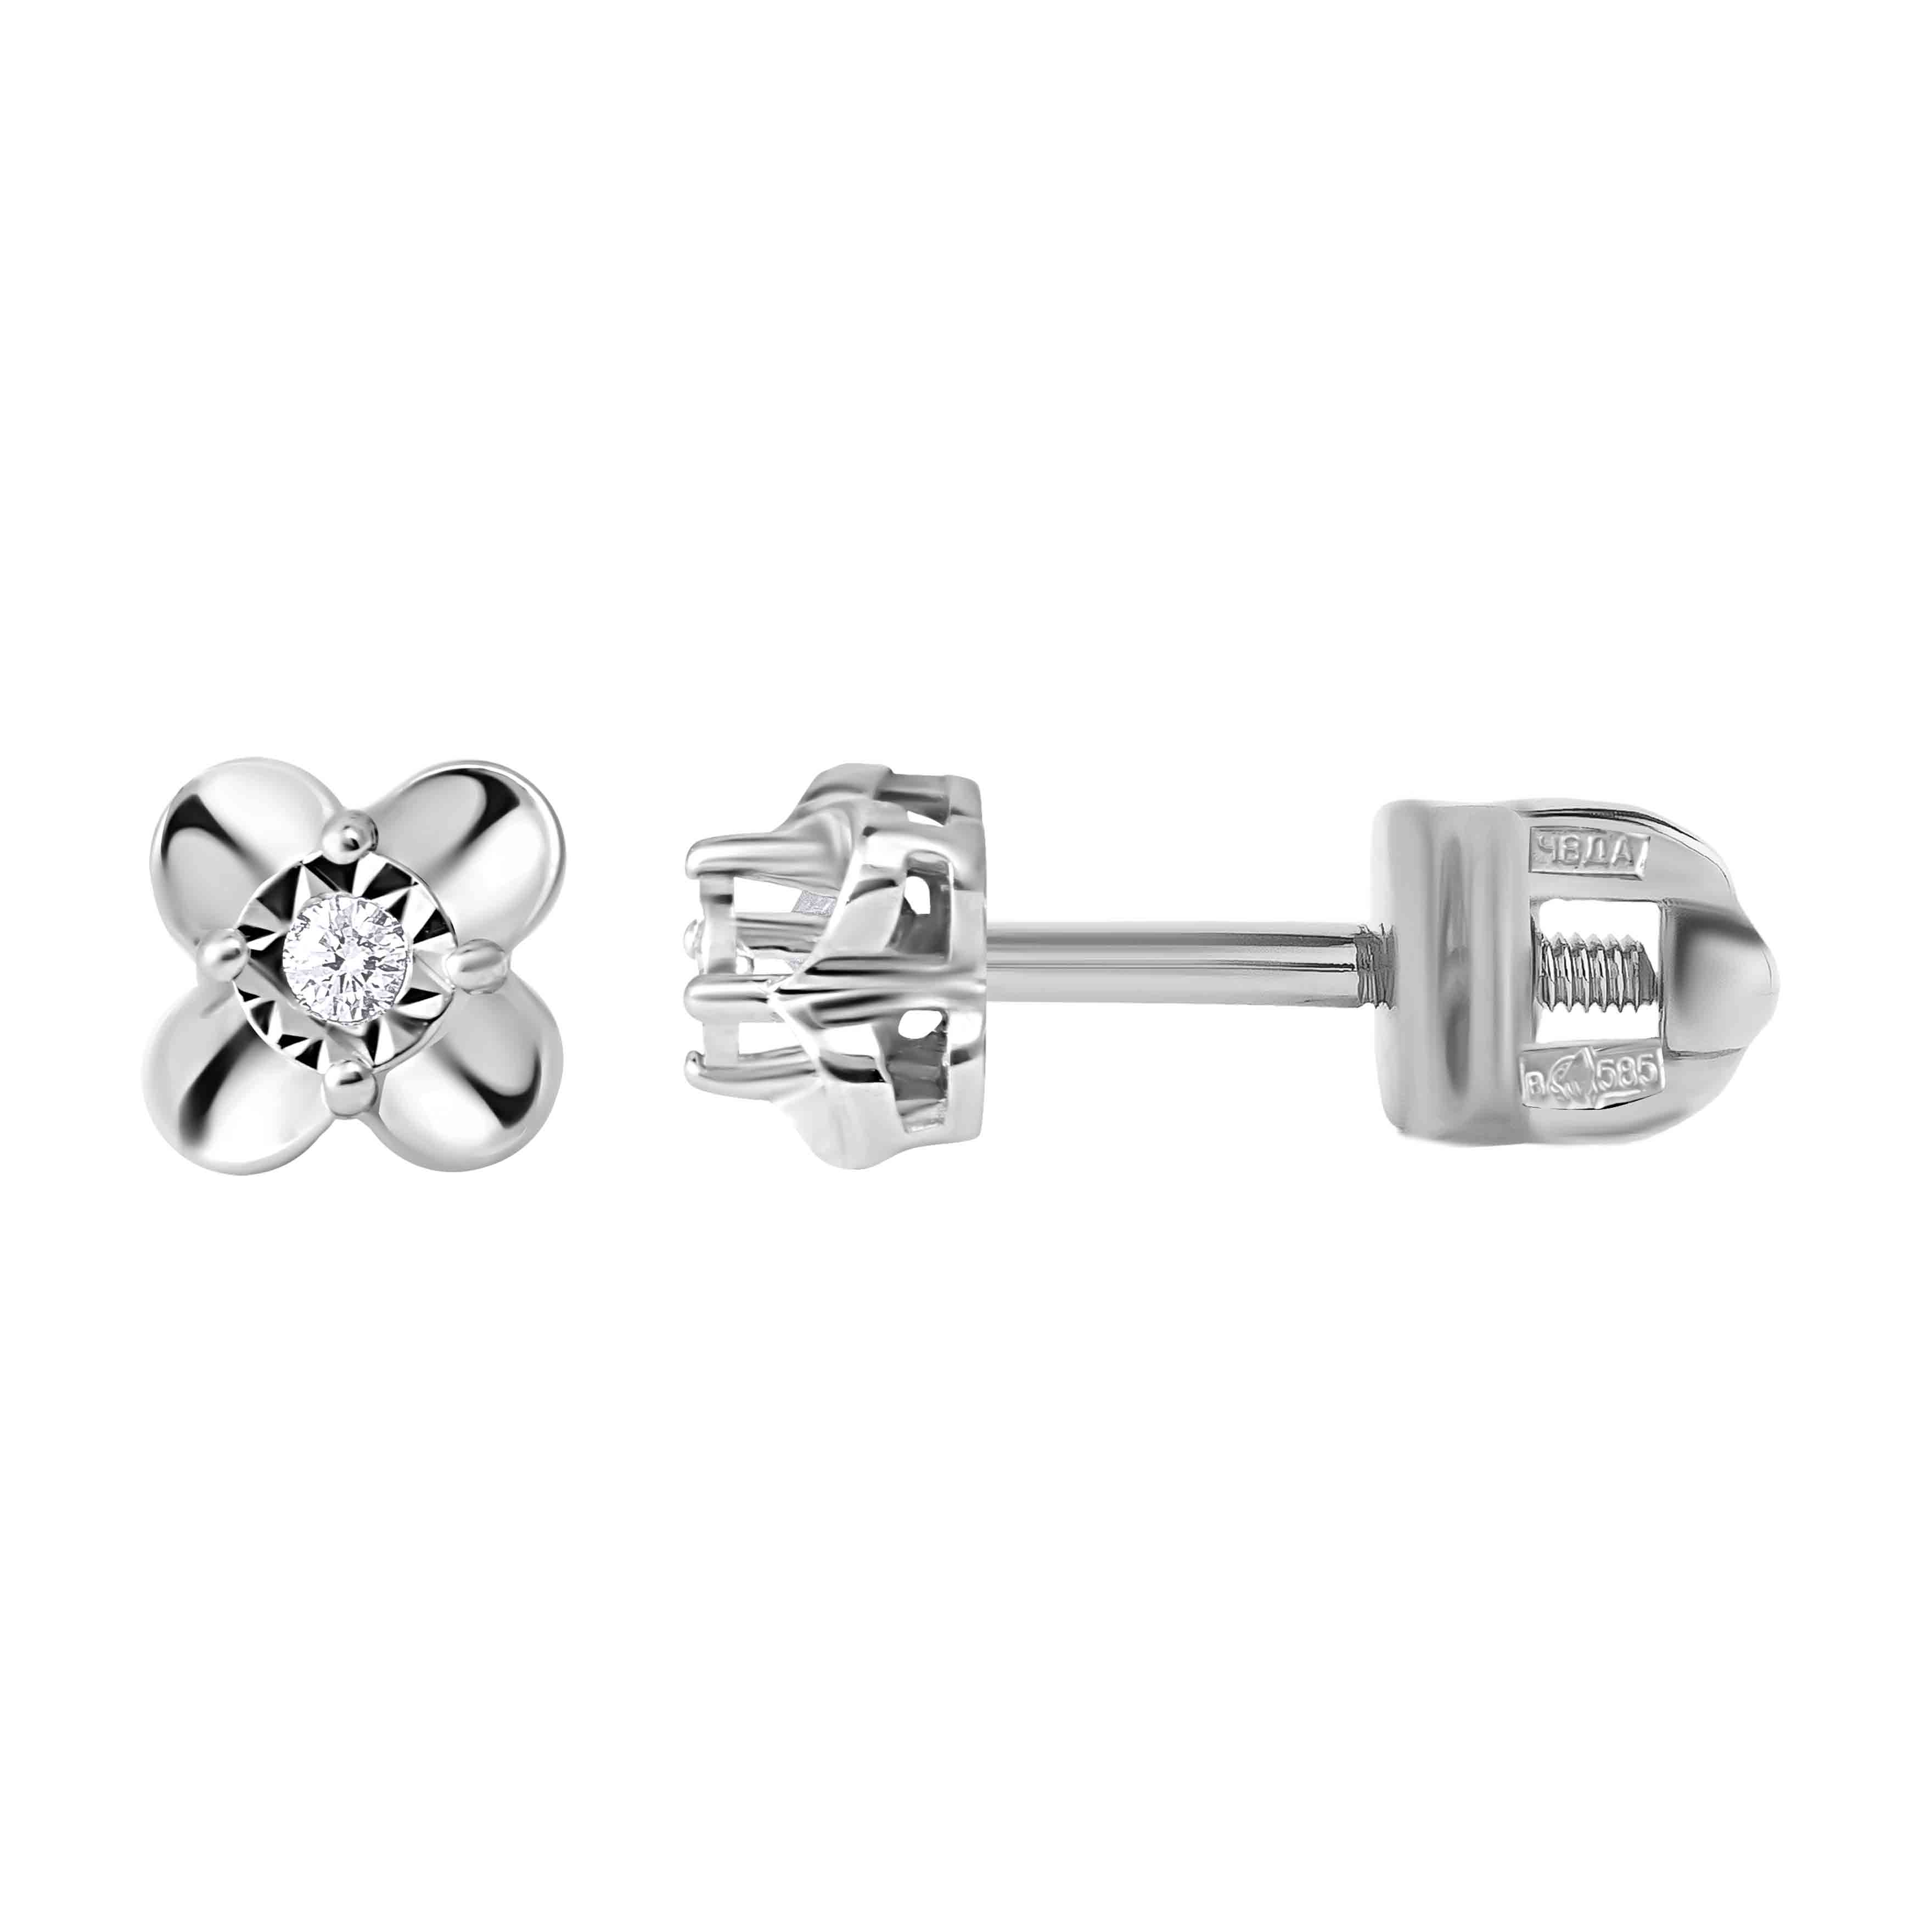 14K White Gold Locking Earring Backs Replacements for Diamond Studs, 2  Pairs 925 Sterling Silver Locking Earring Backs, Secure Hypoallergenic  Earring